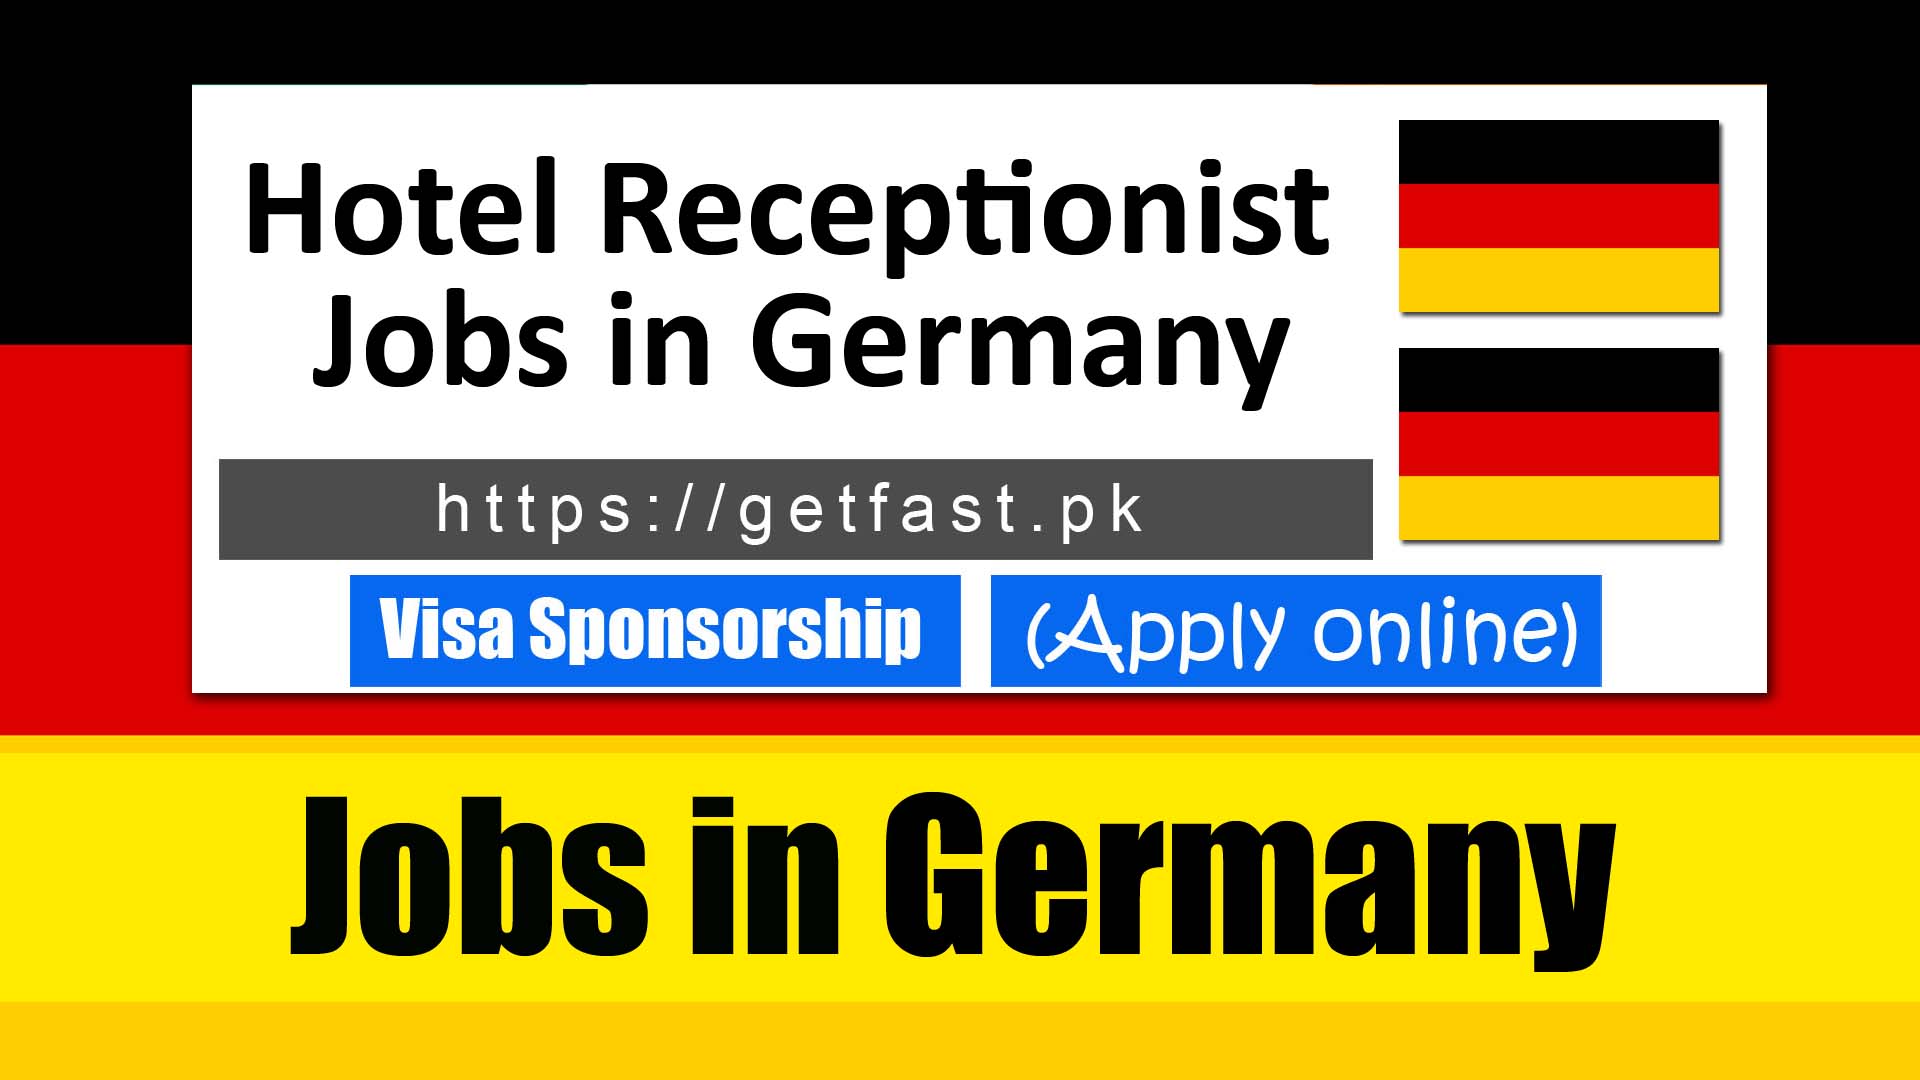 Hotel Receptionist Jobs in Germany for foreigners